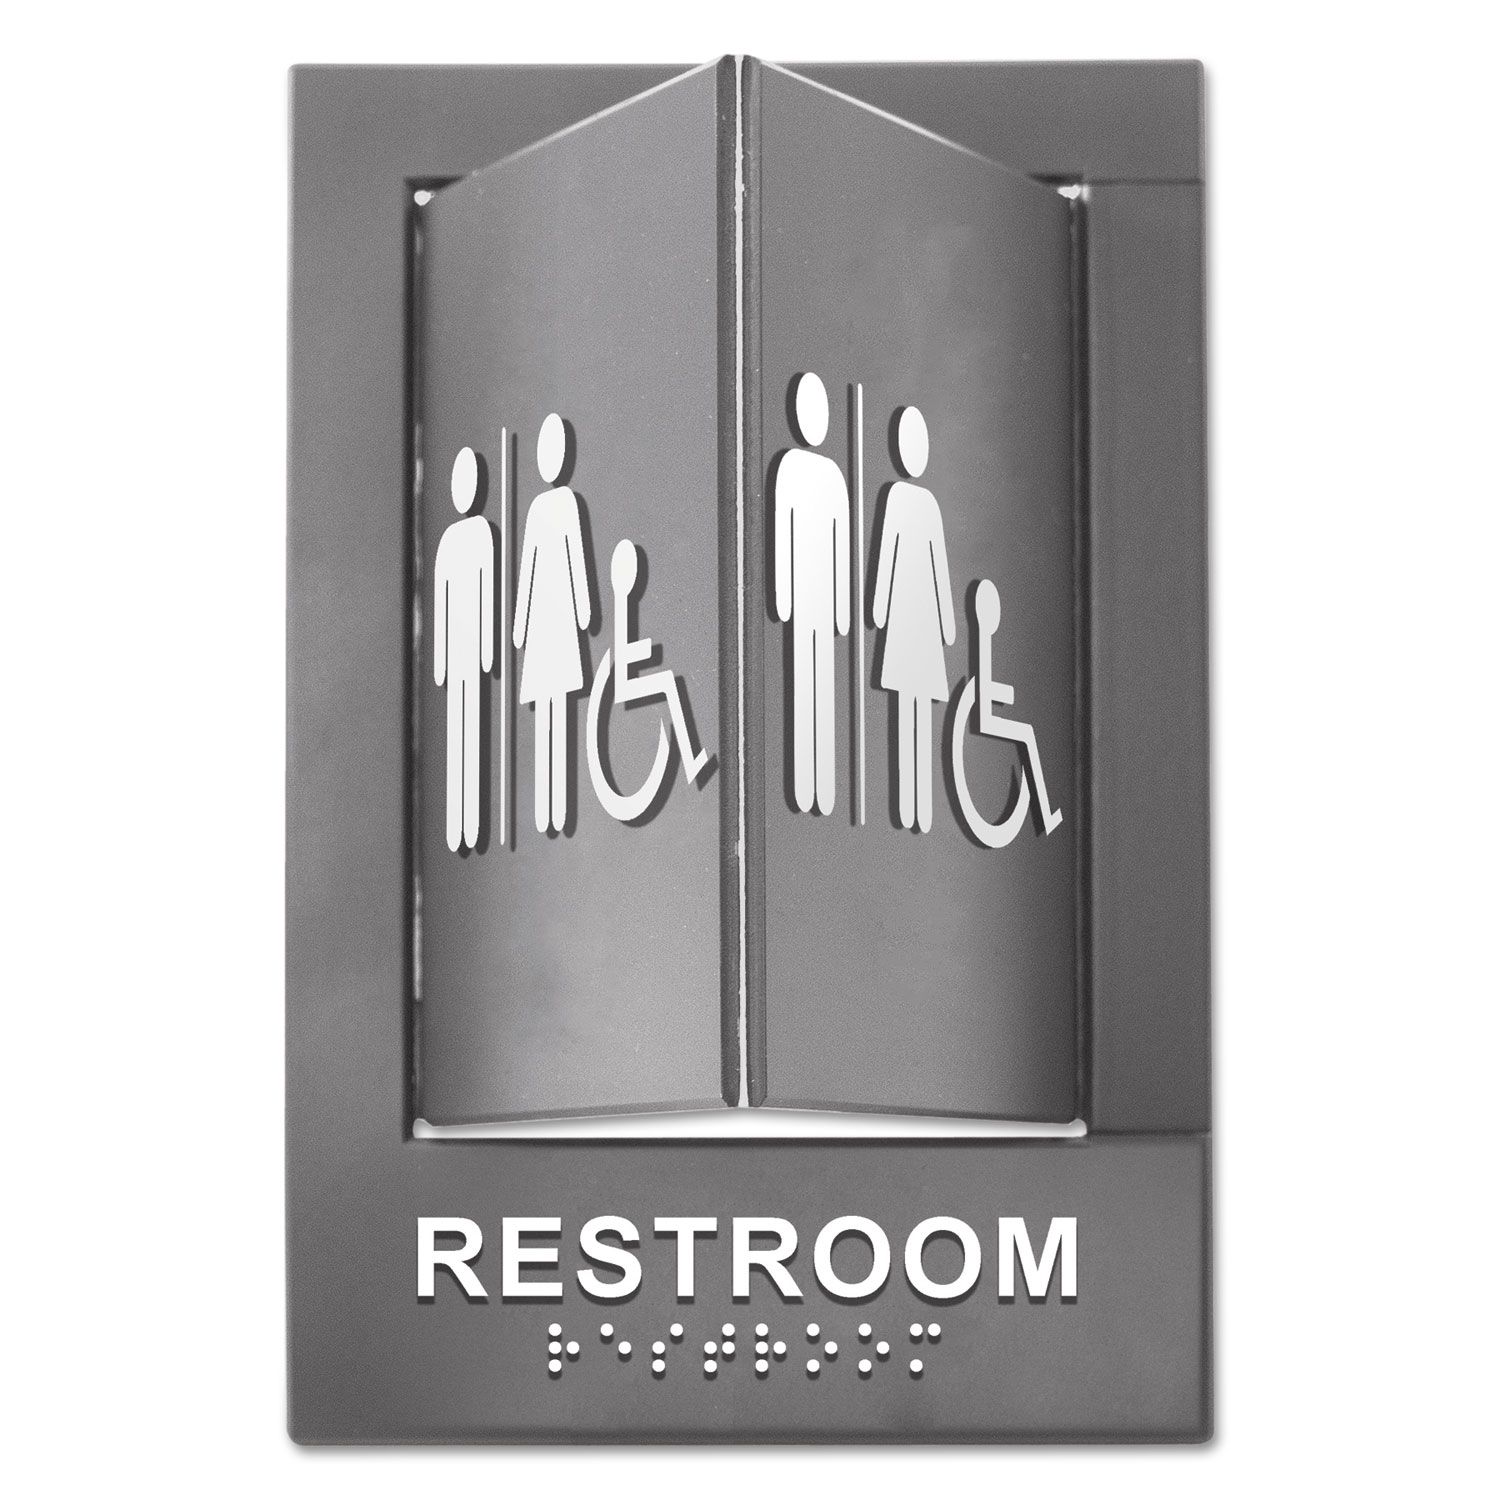 Pop-Out ADA Sign, Wheelchair, Tactile Symbol/Braille, Plastic, 6 x 9, Gray/White